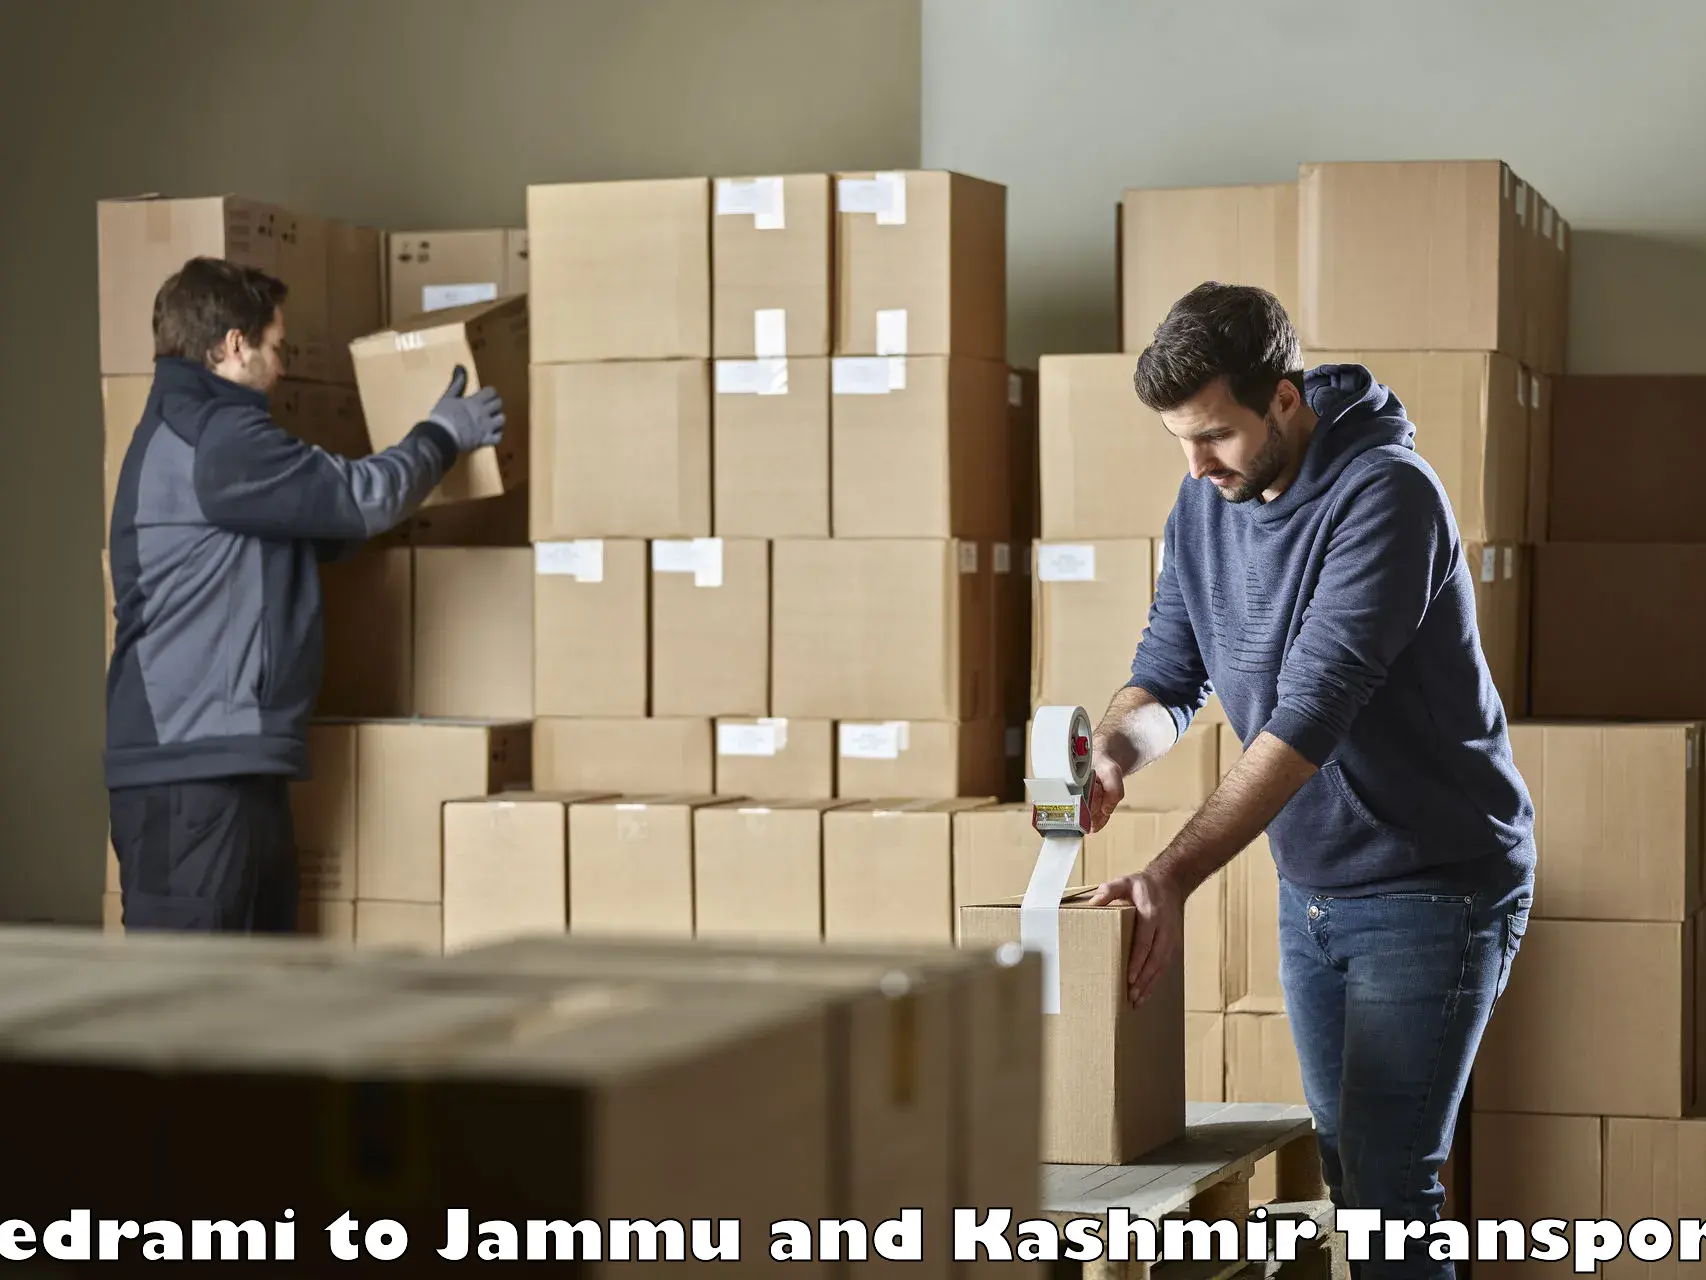 Commercial transport service yedrami to Anantnag